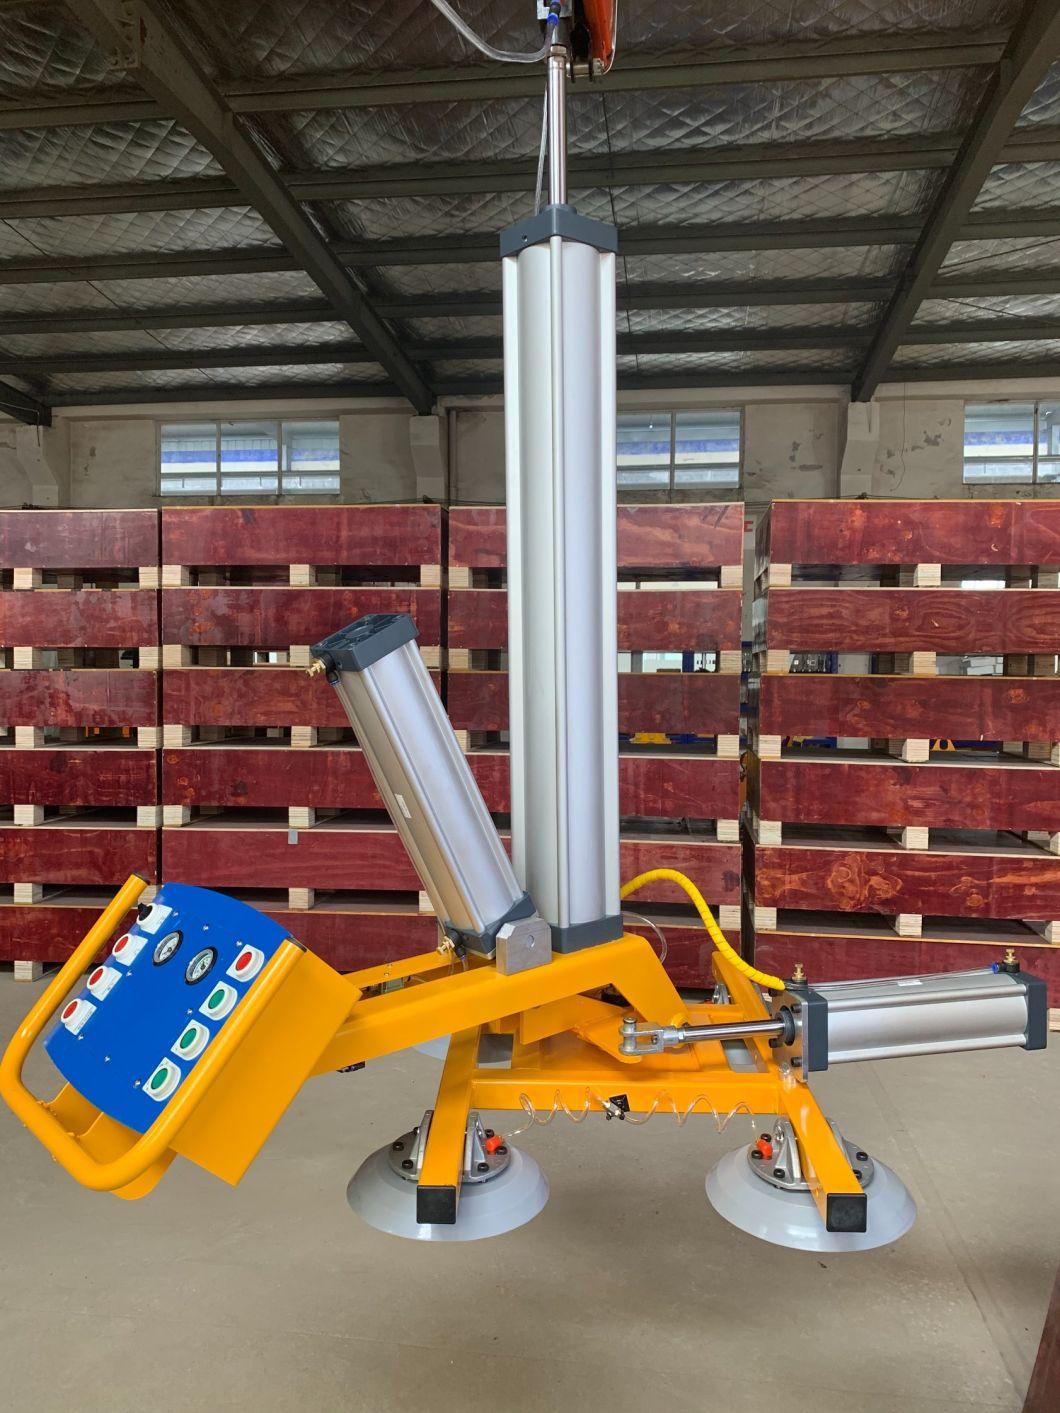 Manul Control Vacuum Lifter with Ari Power Source